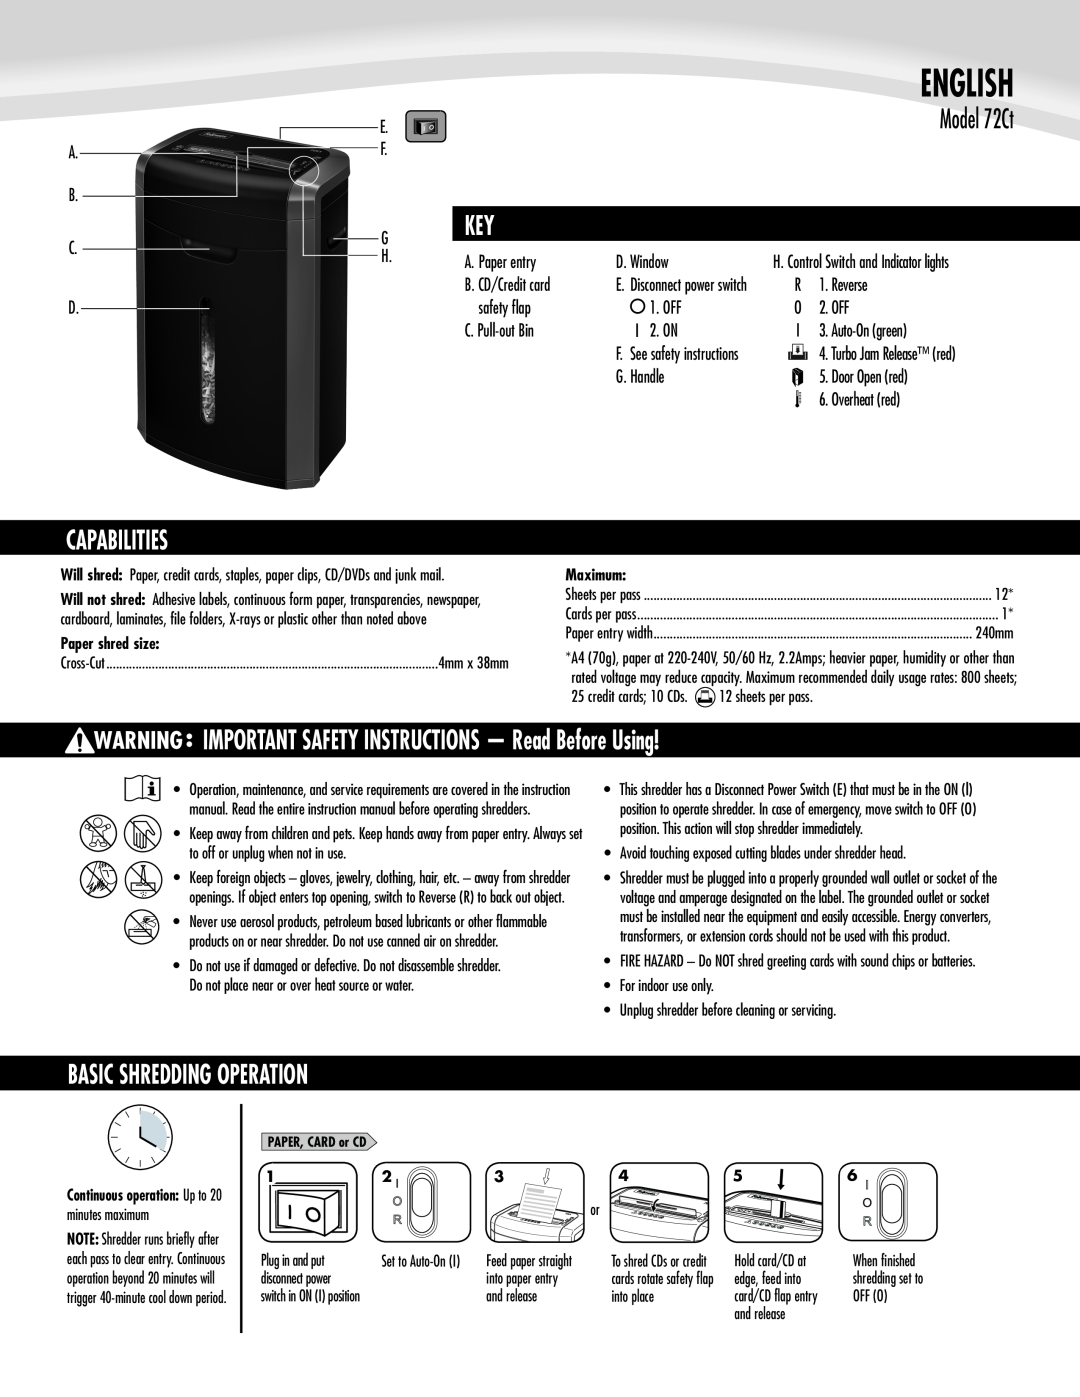 Fellowes 72Ct manual Capabilities, IMPORTANT SAFETY INSTRUCTIONS - Read Before Using, Basic Shredding Operation, English 